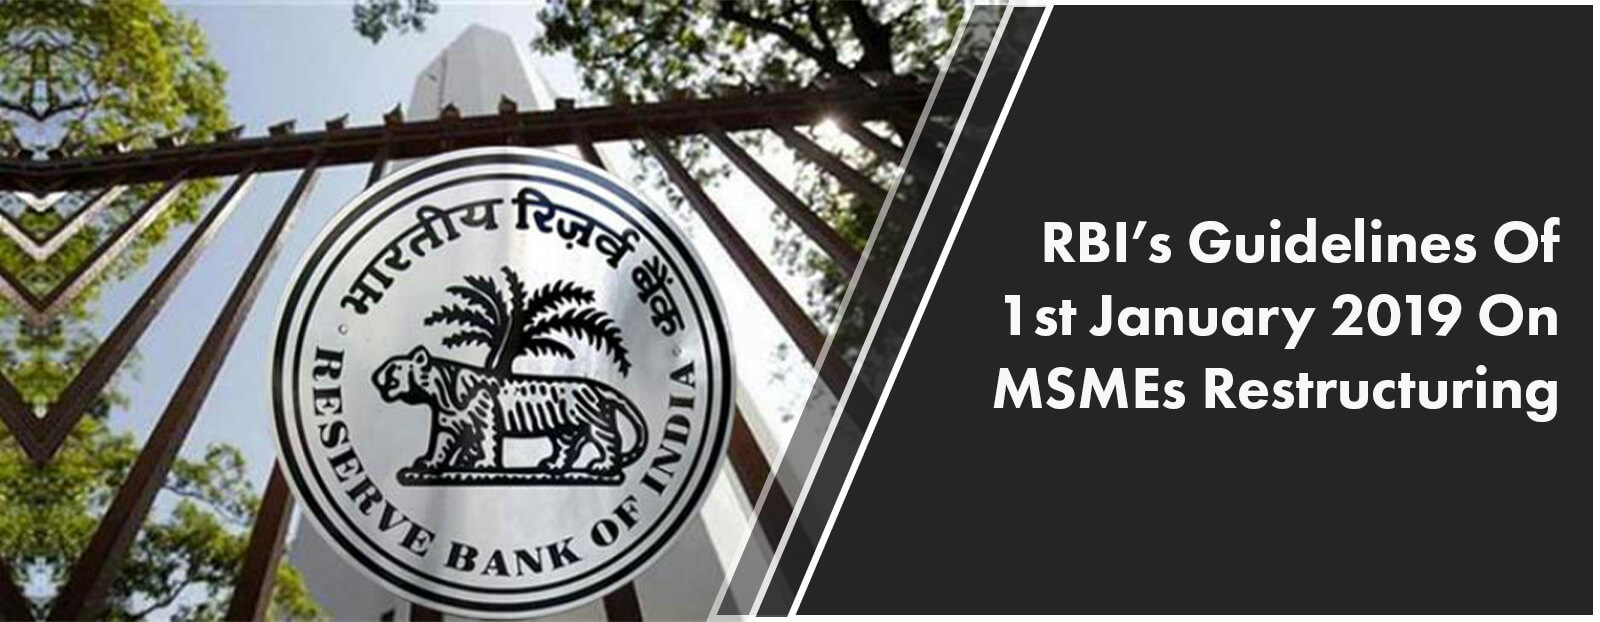 RBI’s Guidelines Of 1st January 2019 On MSMEs Restructuring